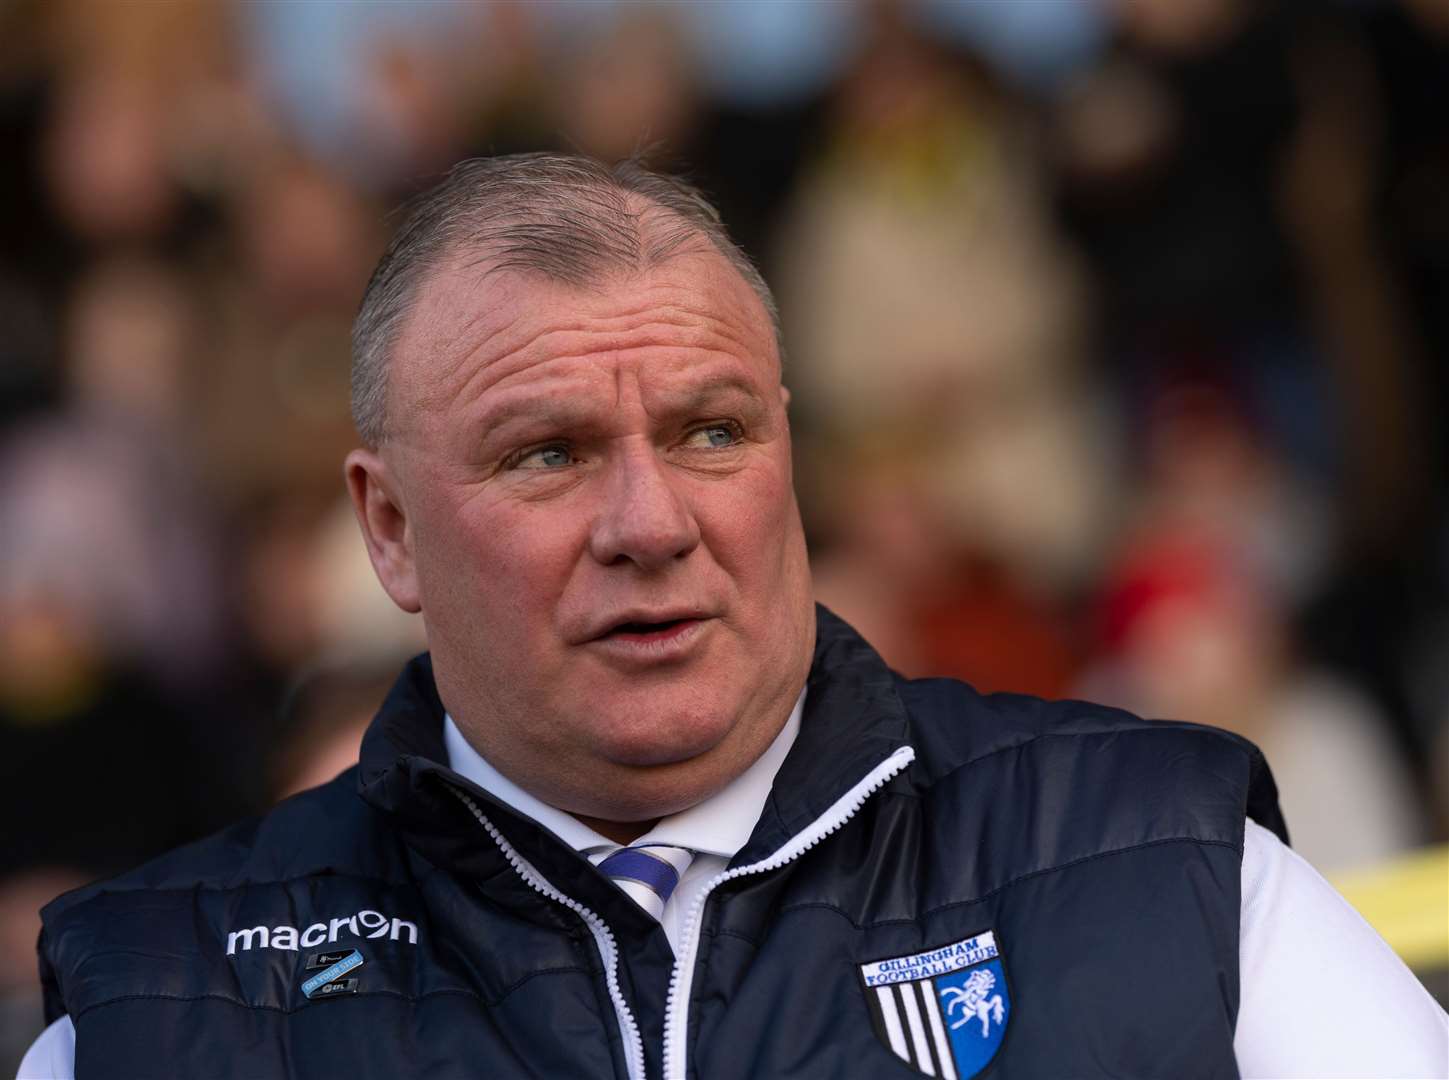 Gillingham boss Steve Evans hopes to keep the play-off dream alive with home win over Wigan